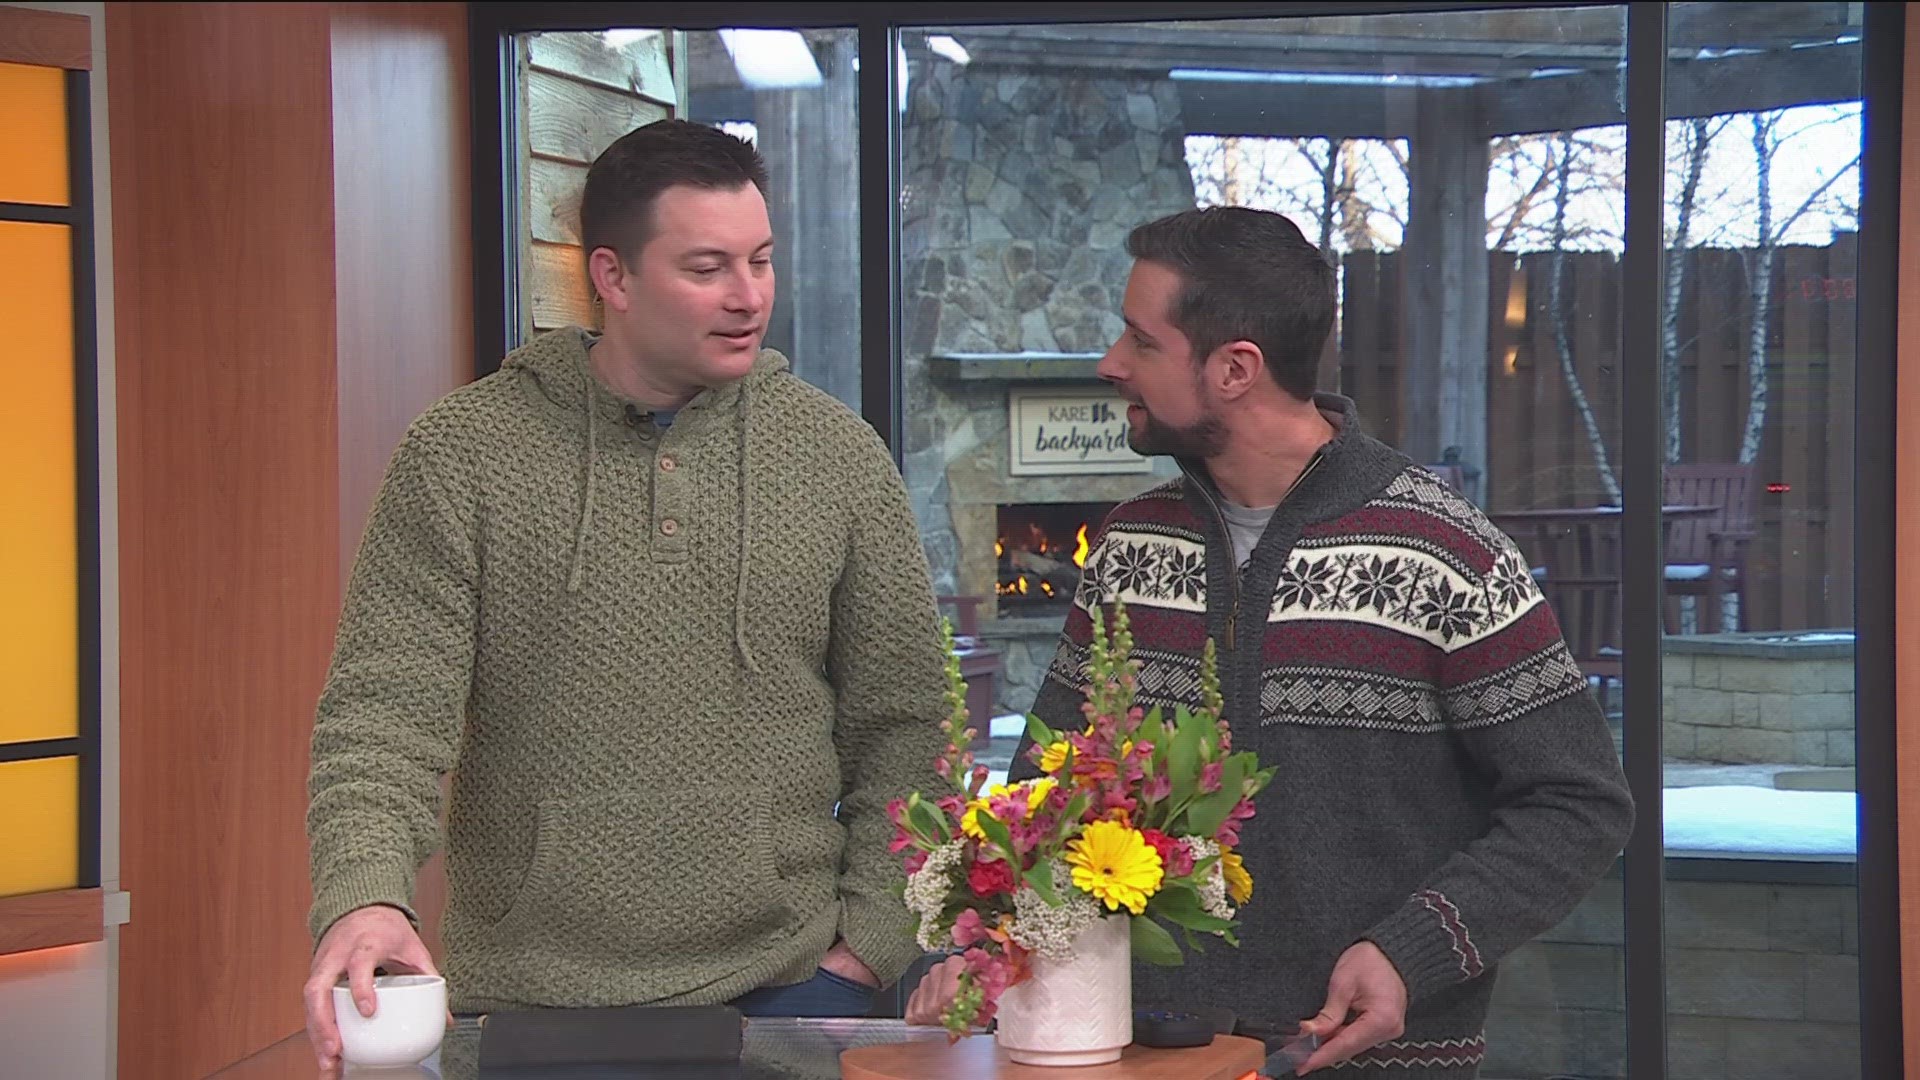 Ben Dery and Chris Hrapsky provide a little commentary about each other's winter sweater.